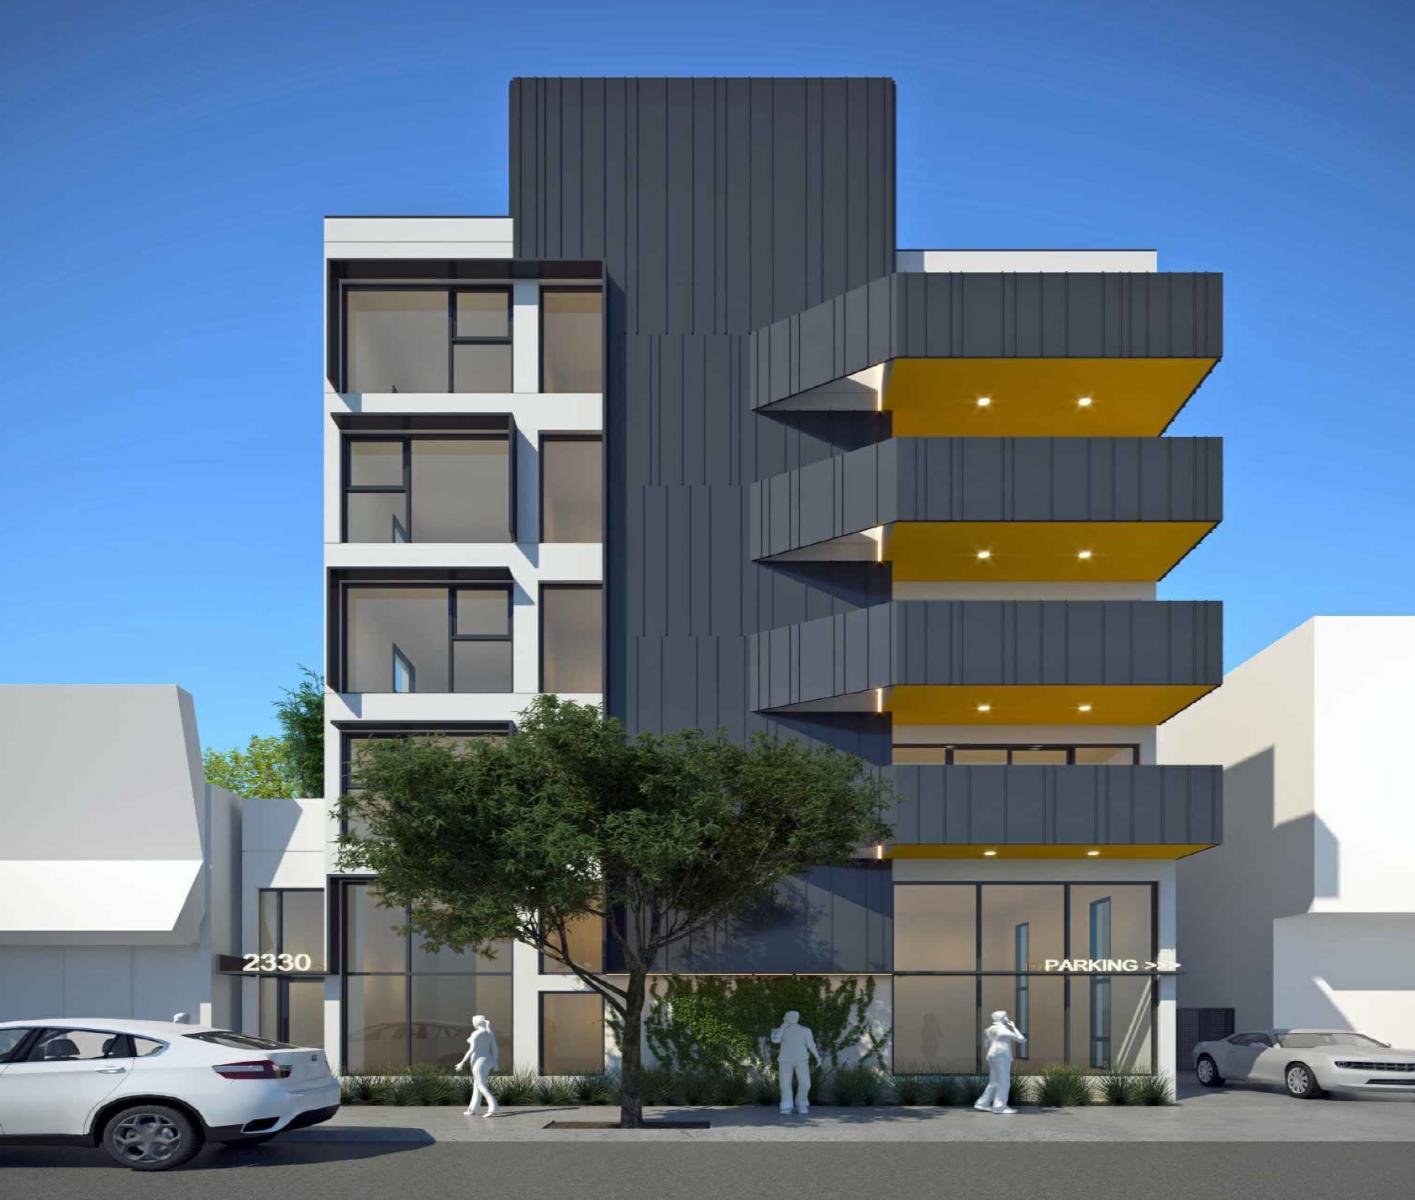 18 apartments to replace commercial building at 2330 S Westwood 